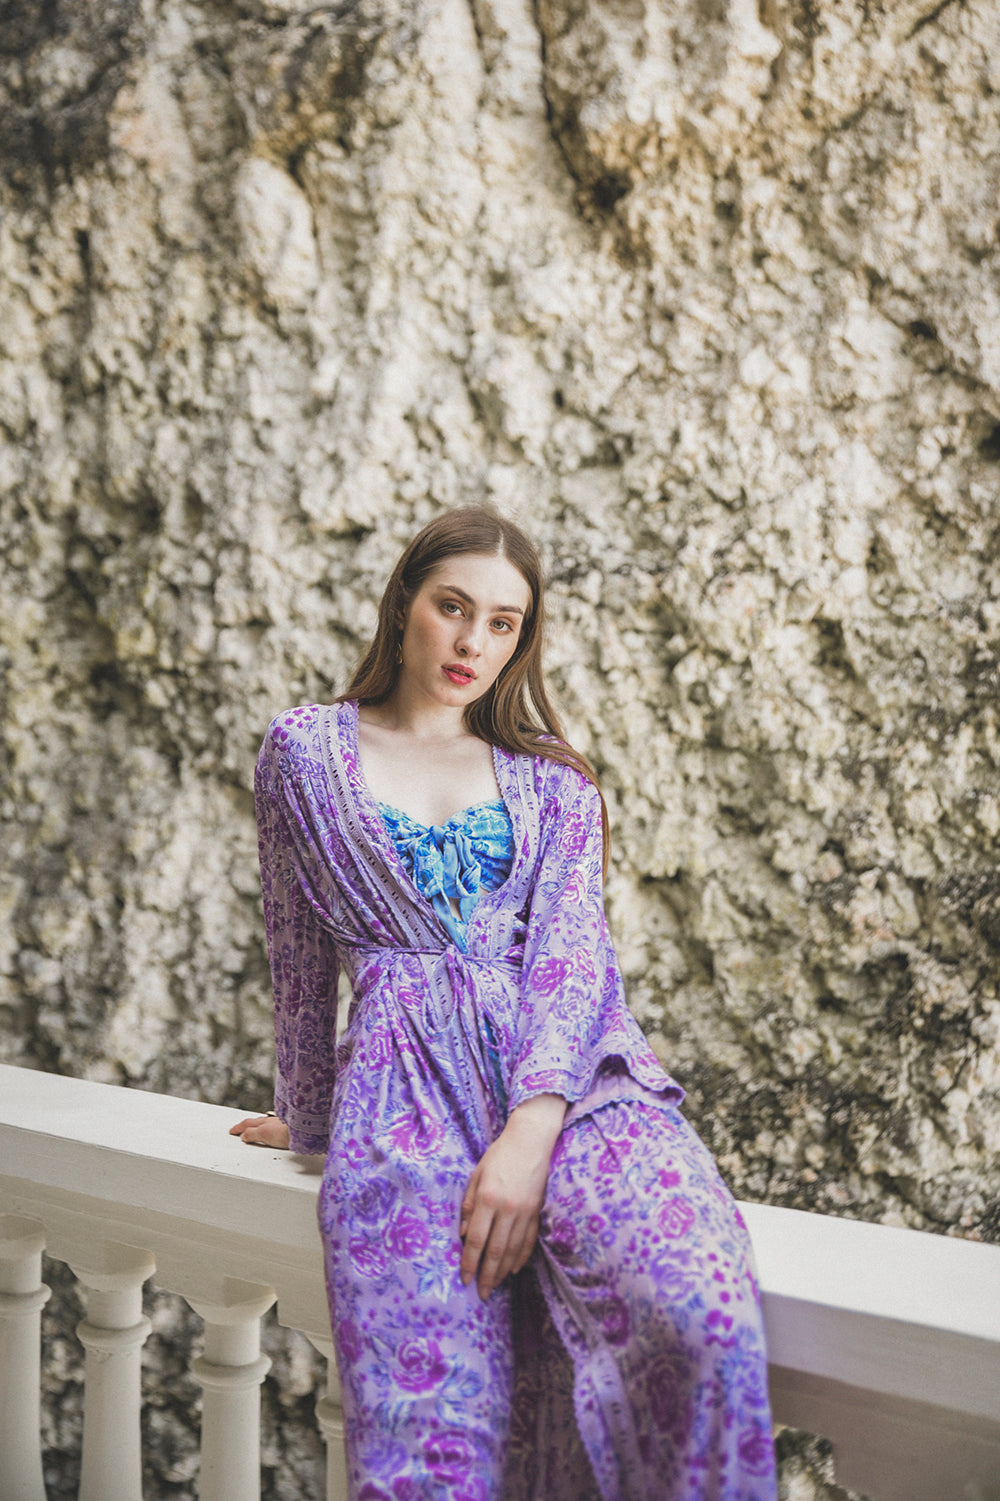 Experience the luxury of lounging with the Peony Long Robe, a kimono-style wonder from Tulle and Batiste's Peony collection, ethically crafted by Balinese artisans